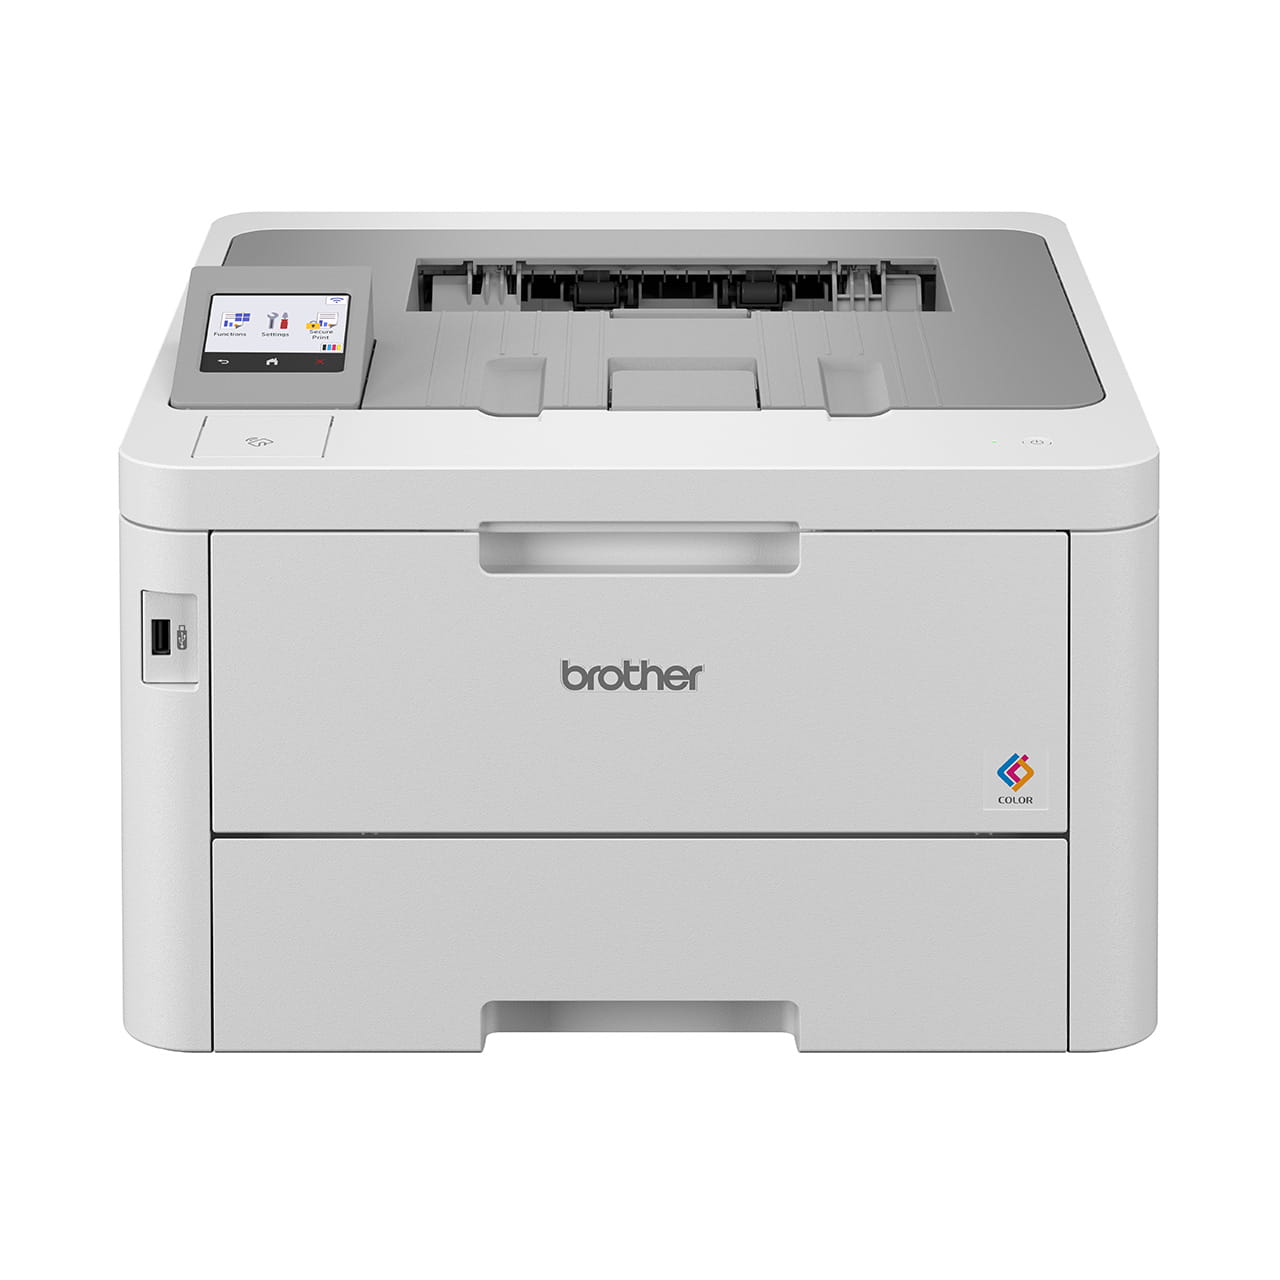 Brother HL-L8240CDW Colour Laser Printer Front View